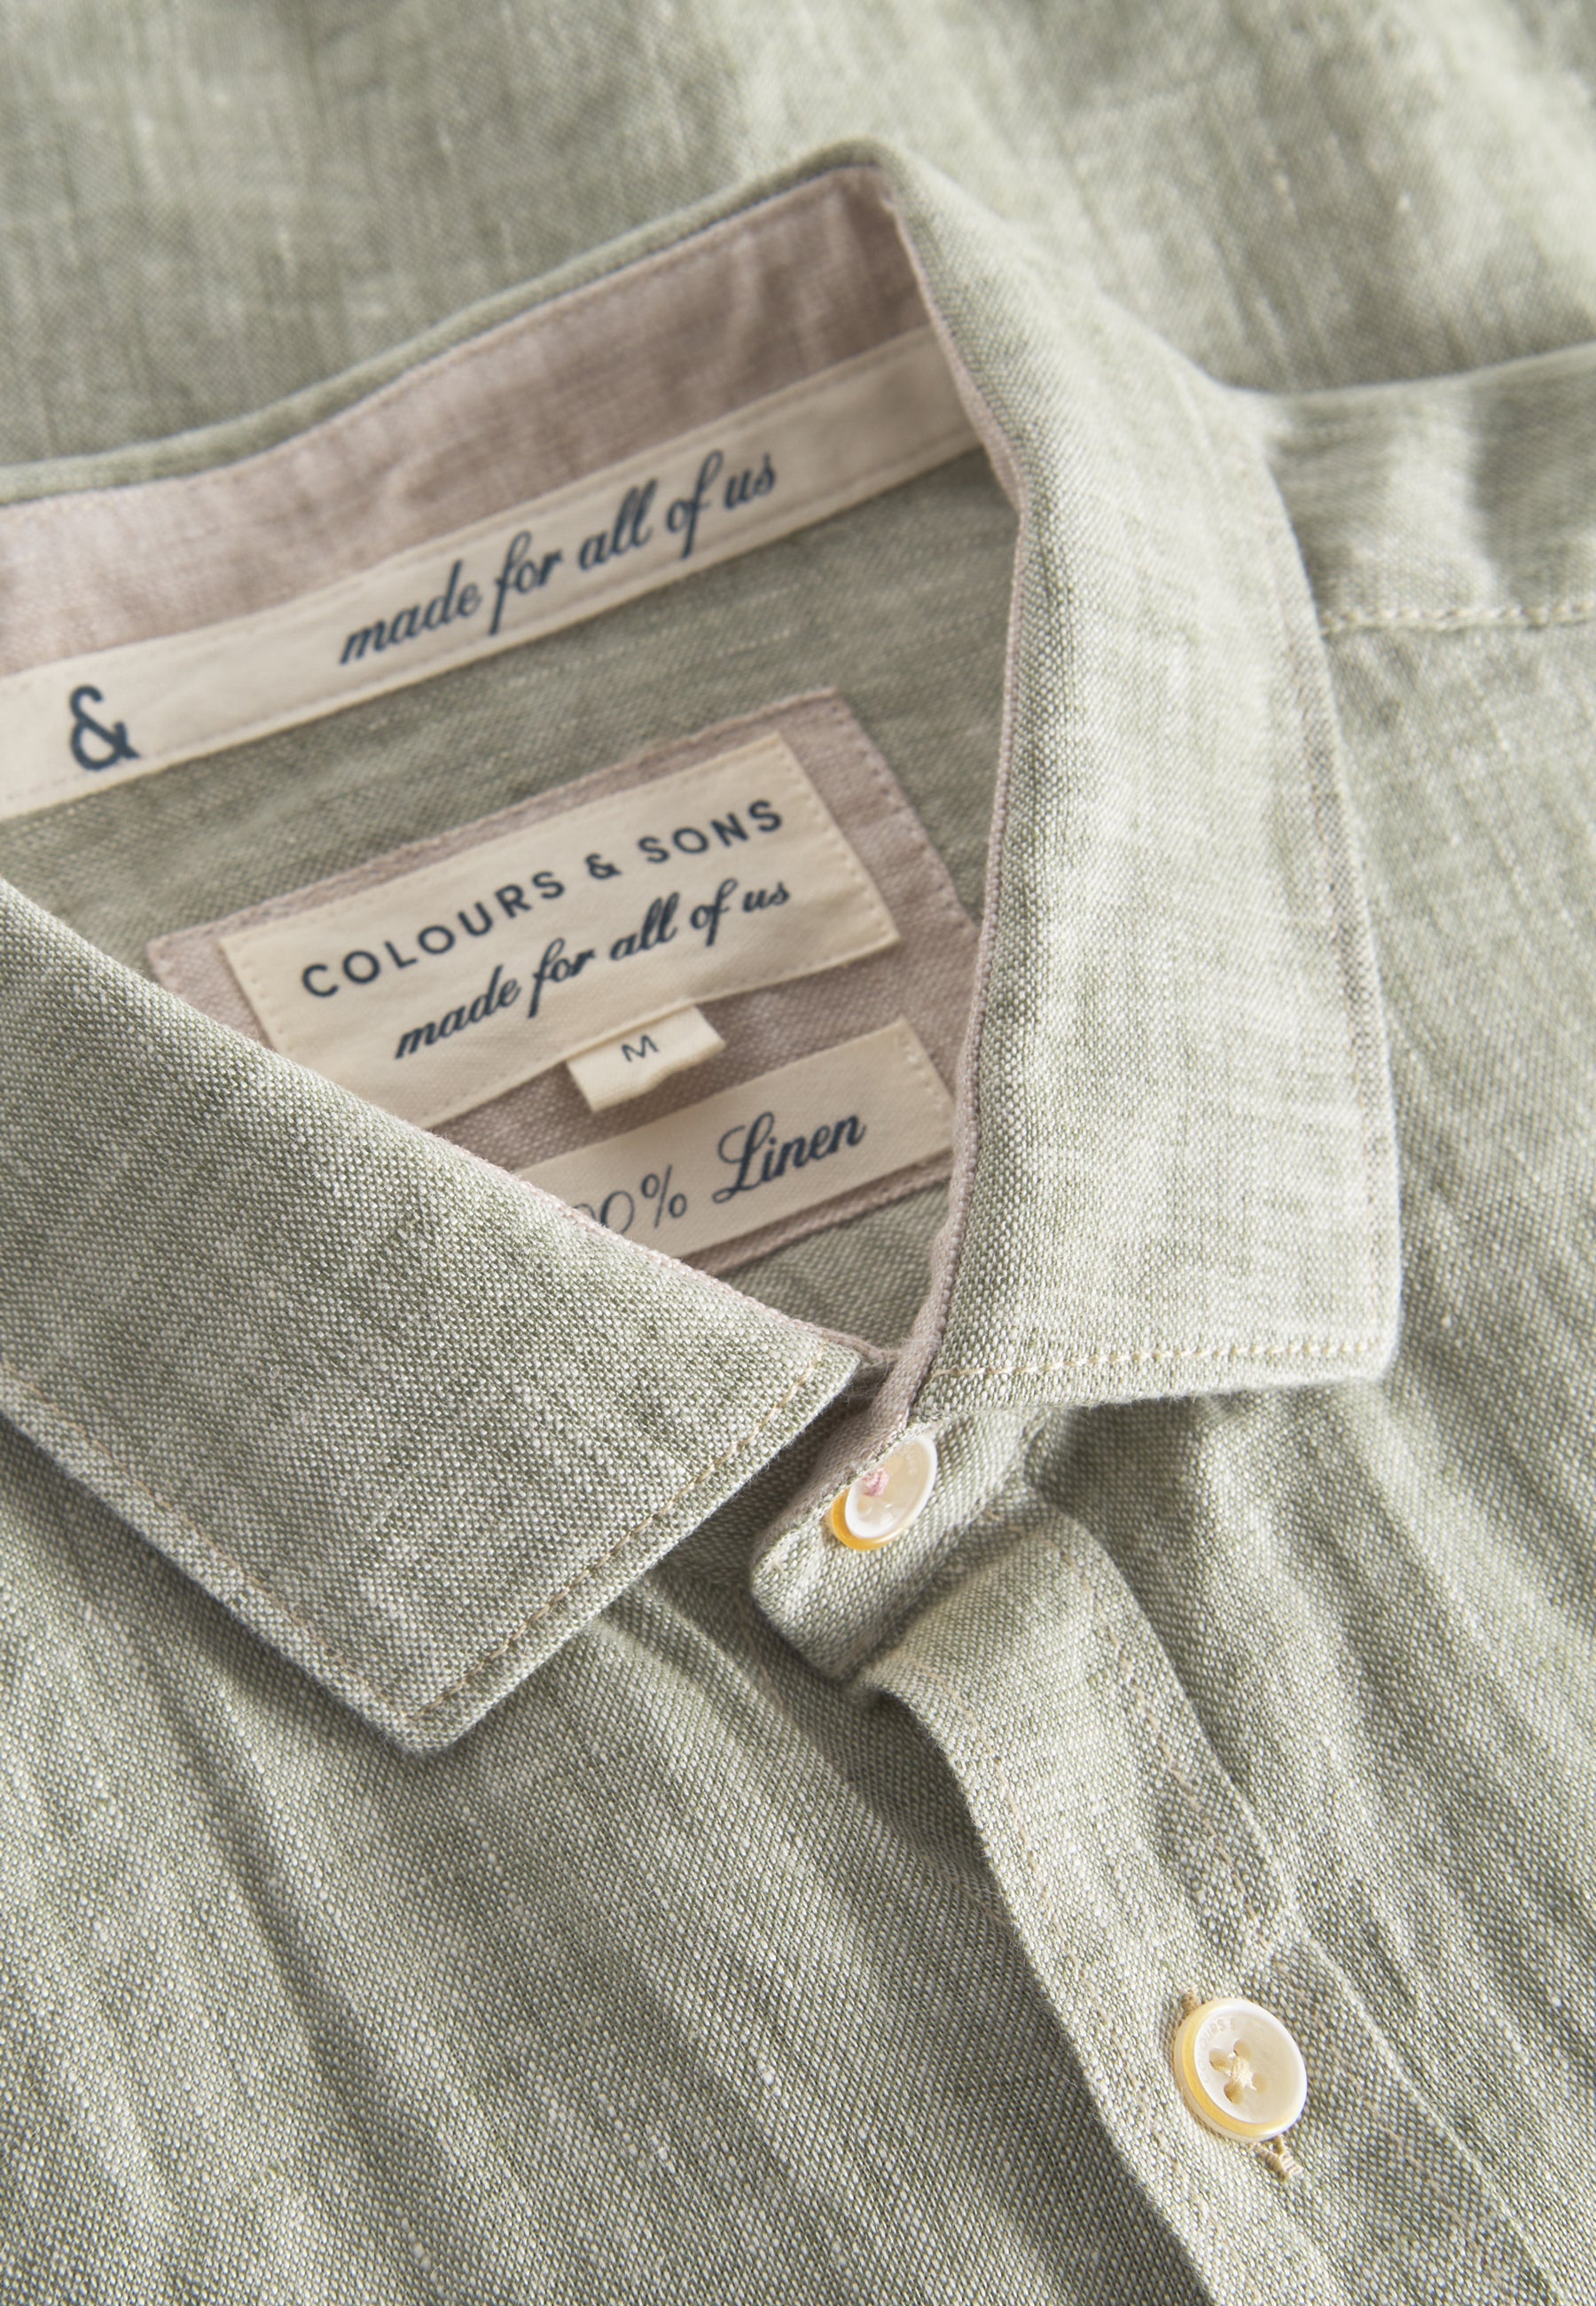 Shirt-Linen in Olive Hemden Colours and Sons   